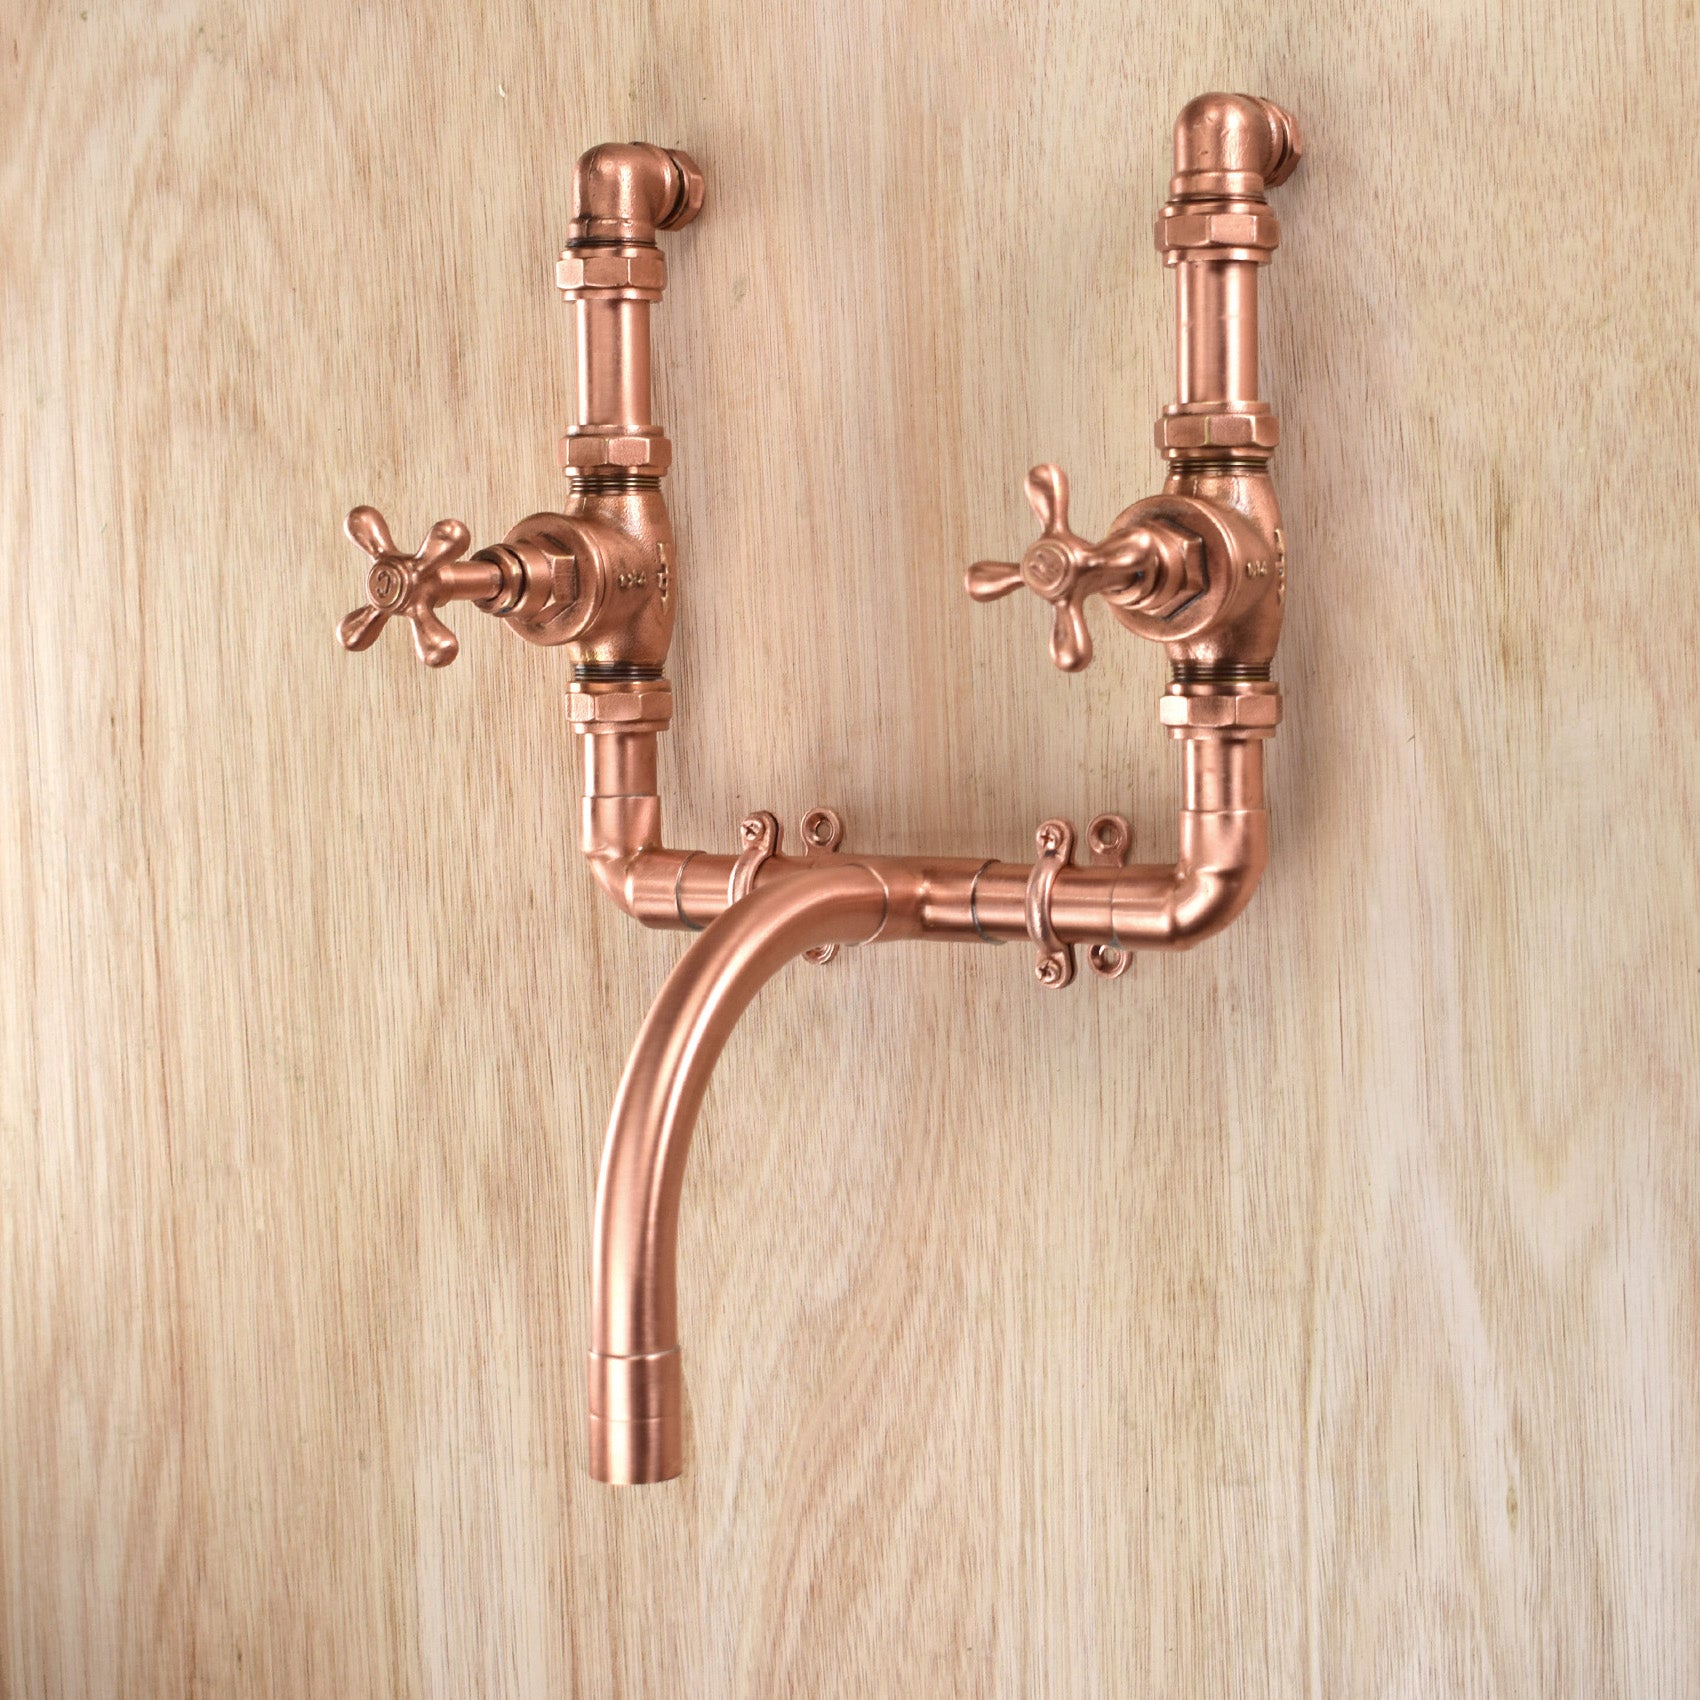 Copper Tap - Purity - On wooden backdrop